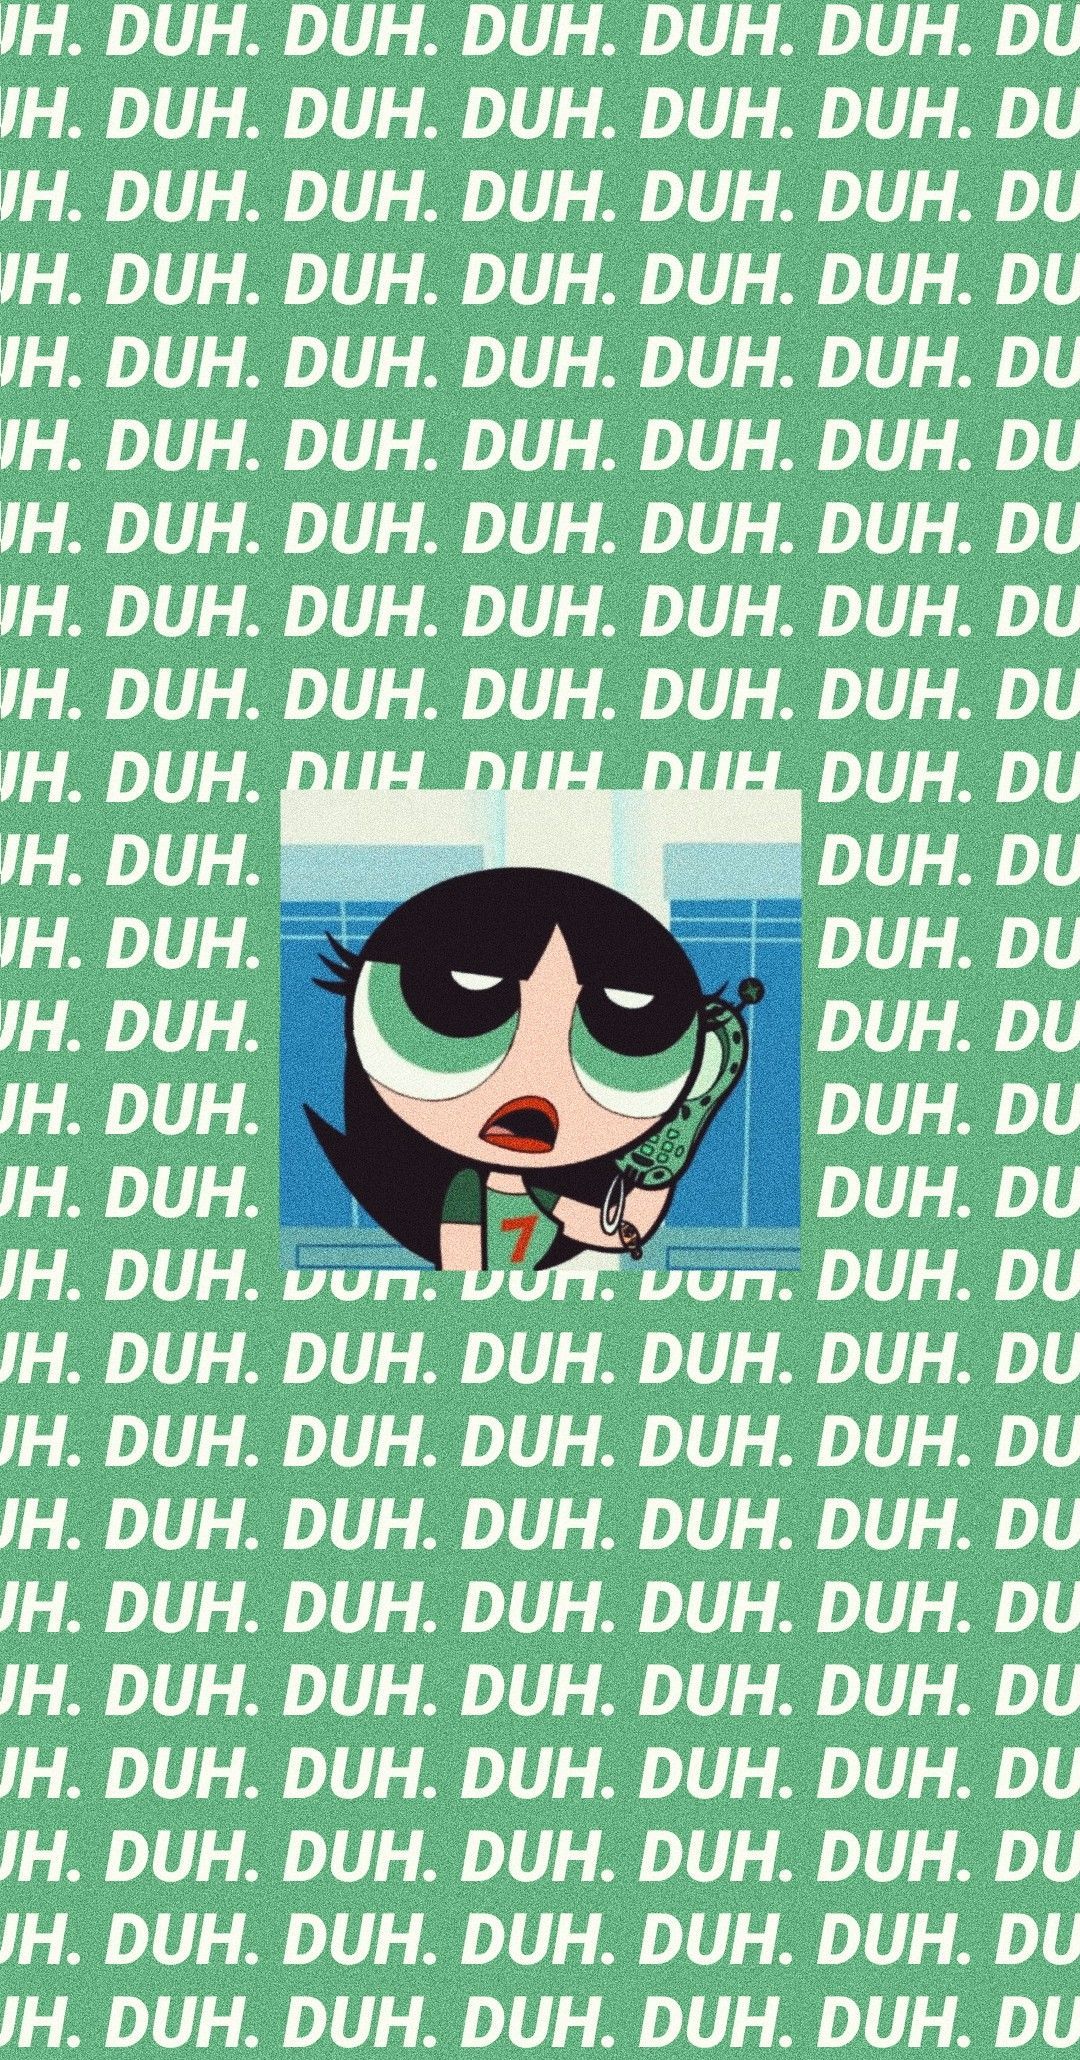 Download Angry Buttercup Powerpuff Girls Aesthetic Illustration Wallpaper